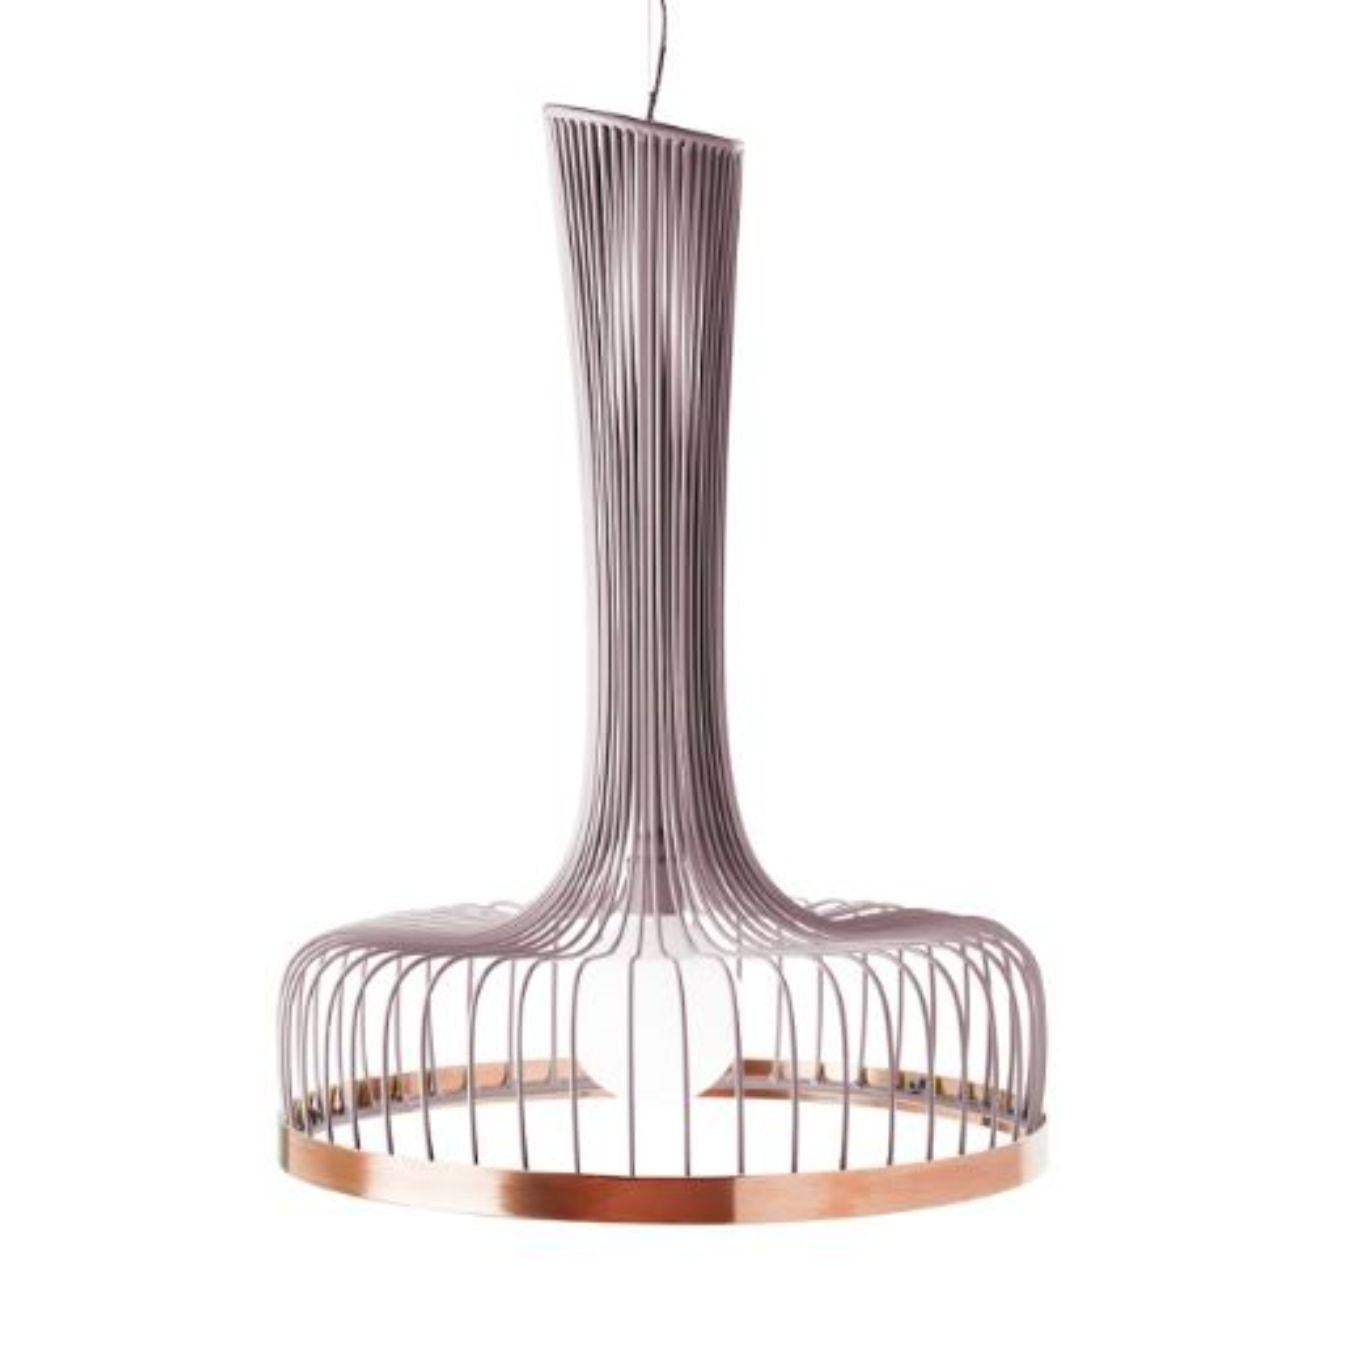 Lilac new spider I suspension lamp with copper ring by Dooq.
Dimensions: W 52 x D 52 x H 70 cm.
Materials: lacquered metal, polished or brushed metal, copper.
Also available in different colors and materials.

Information:
230V/50Hz
E27/1x20W